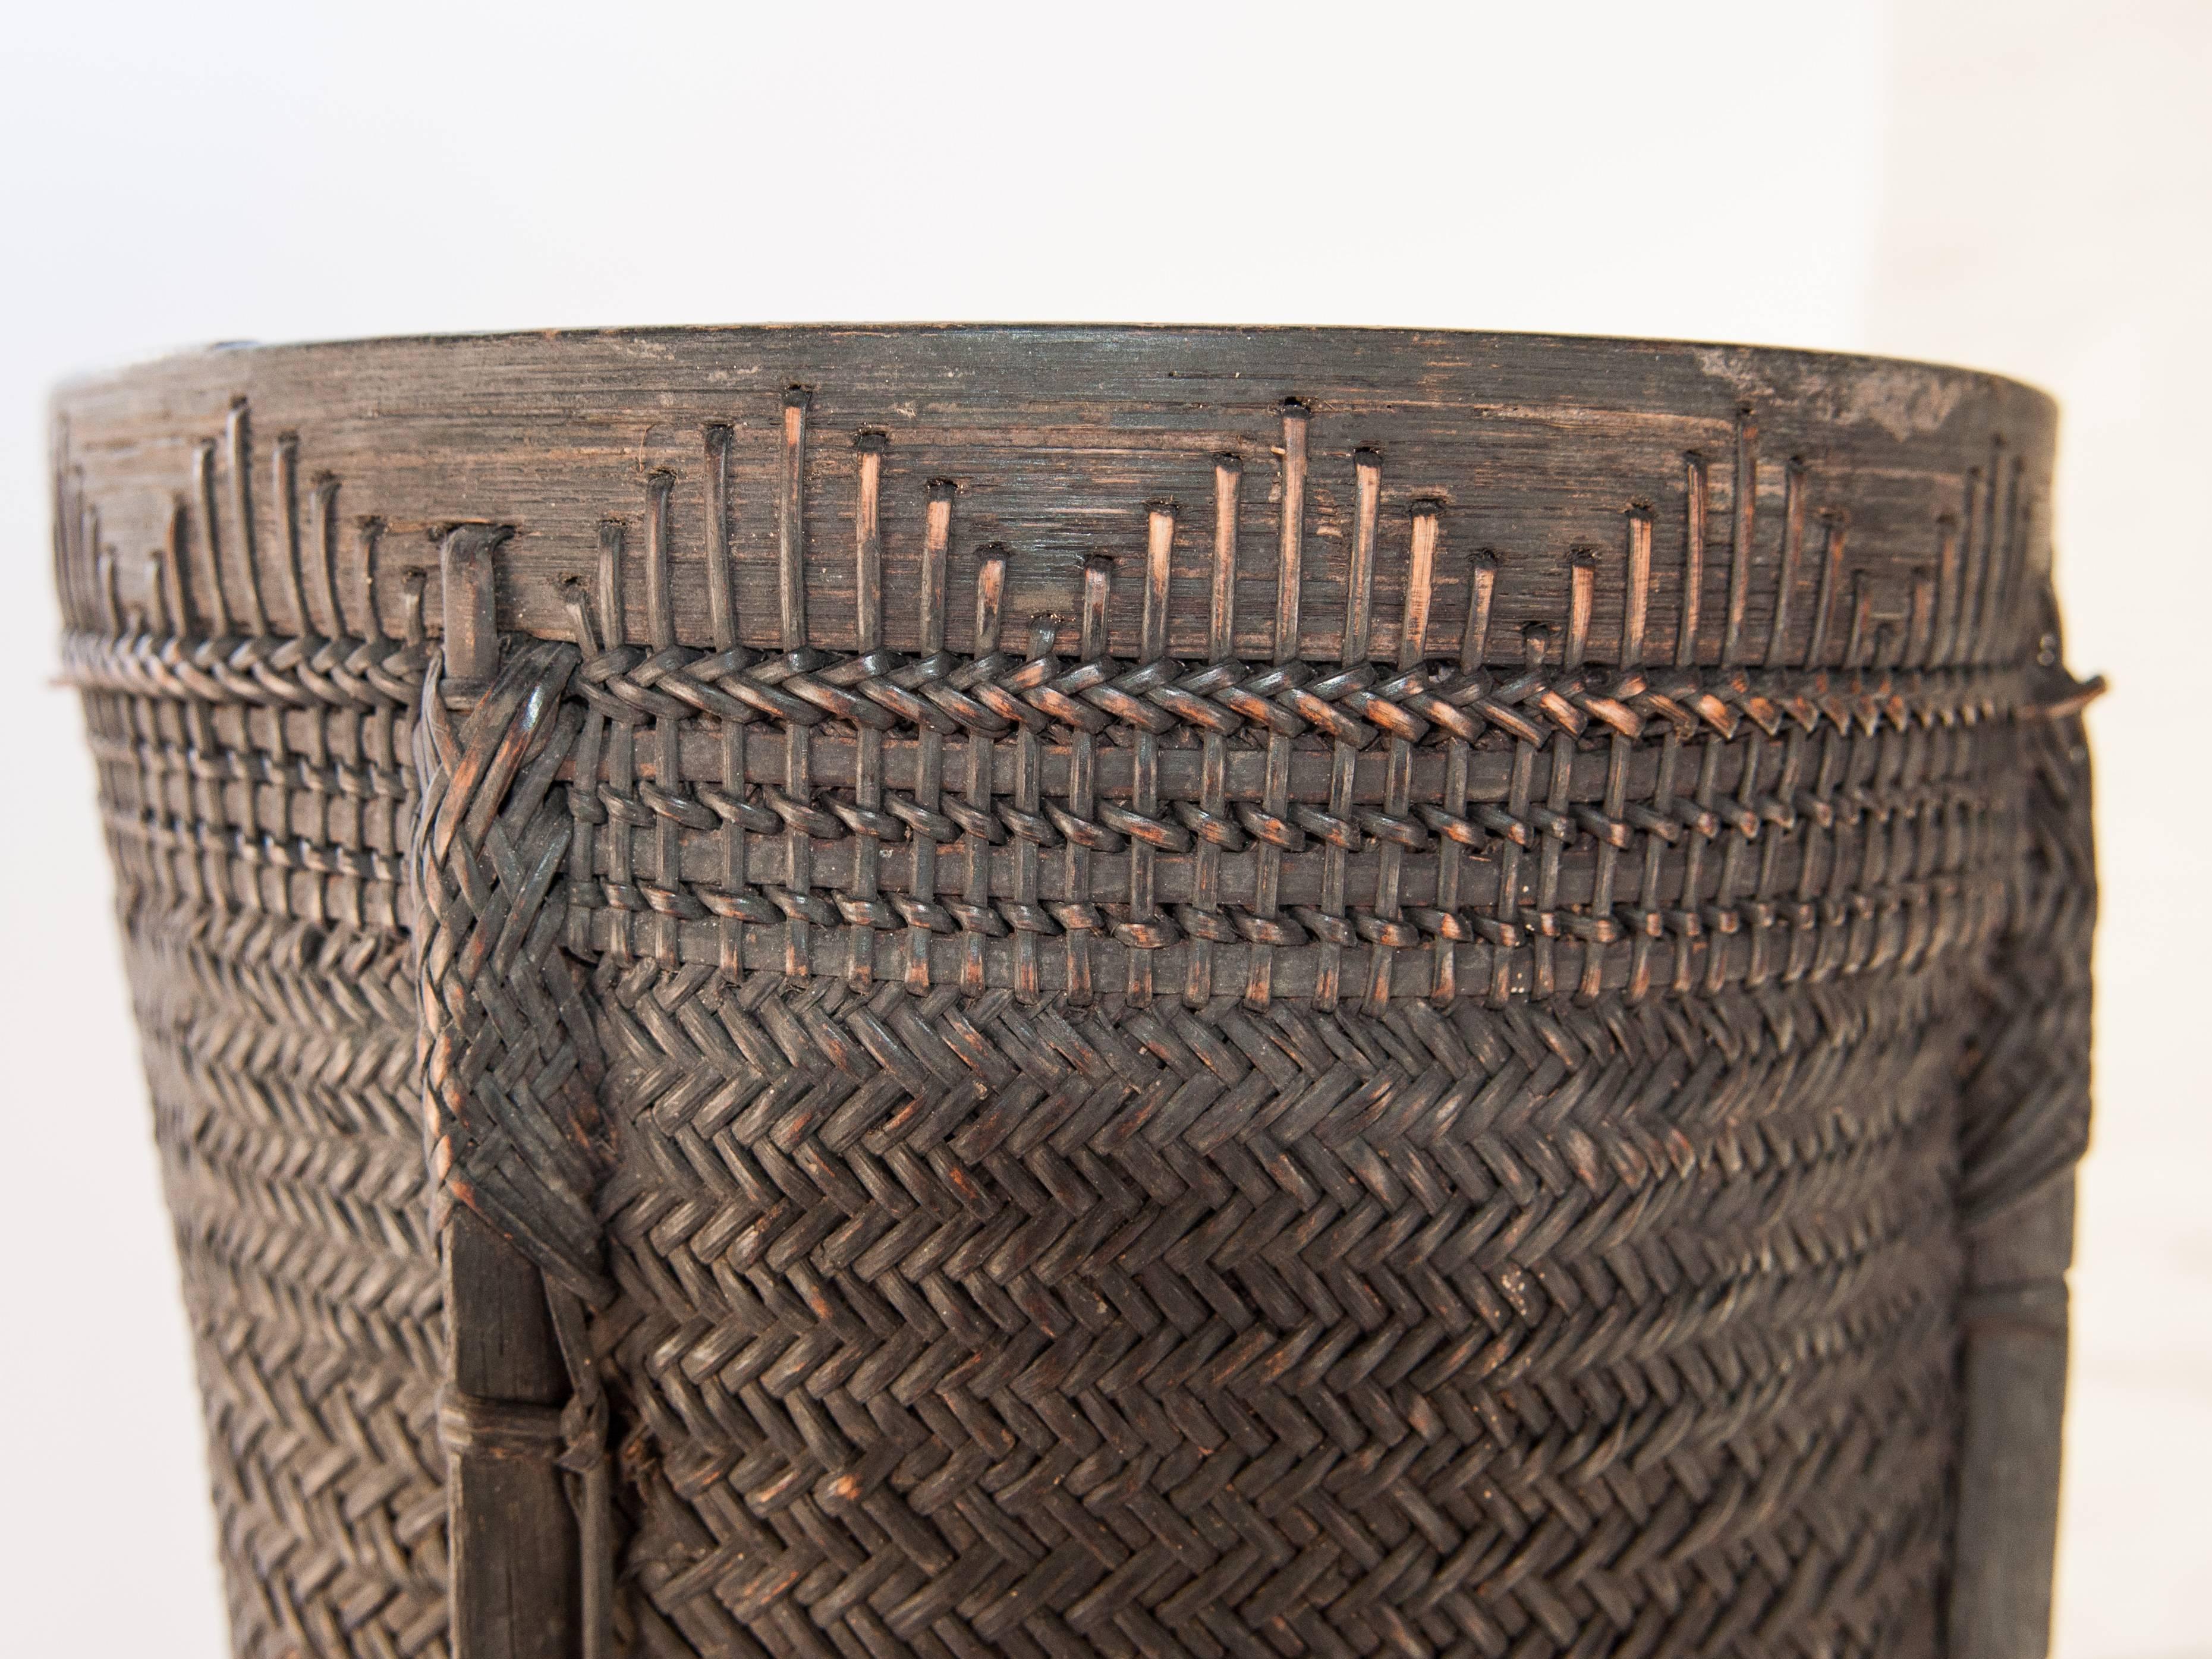 Bamboo Tall Tribal Grain Storage Basket from Borneo, Mid-Late 20th Century